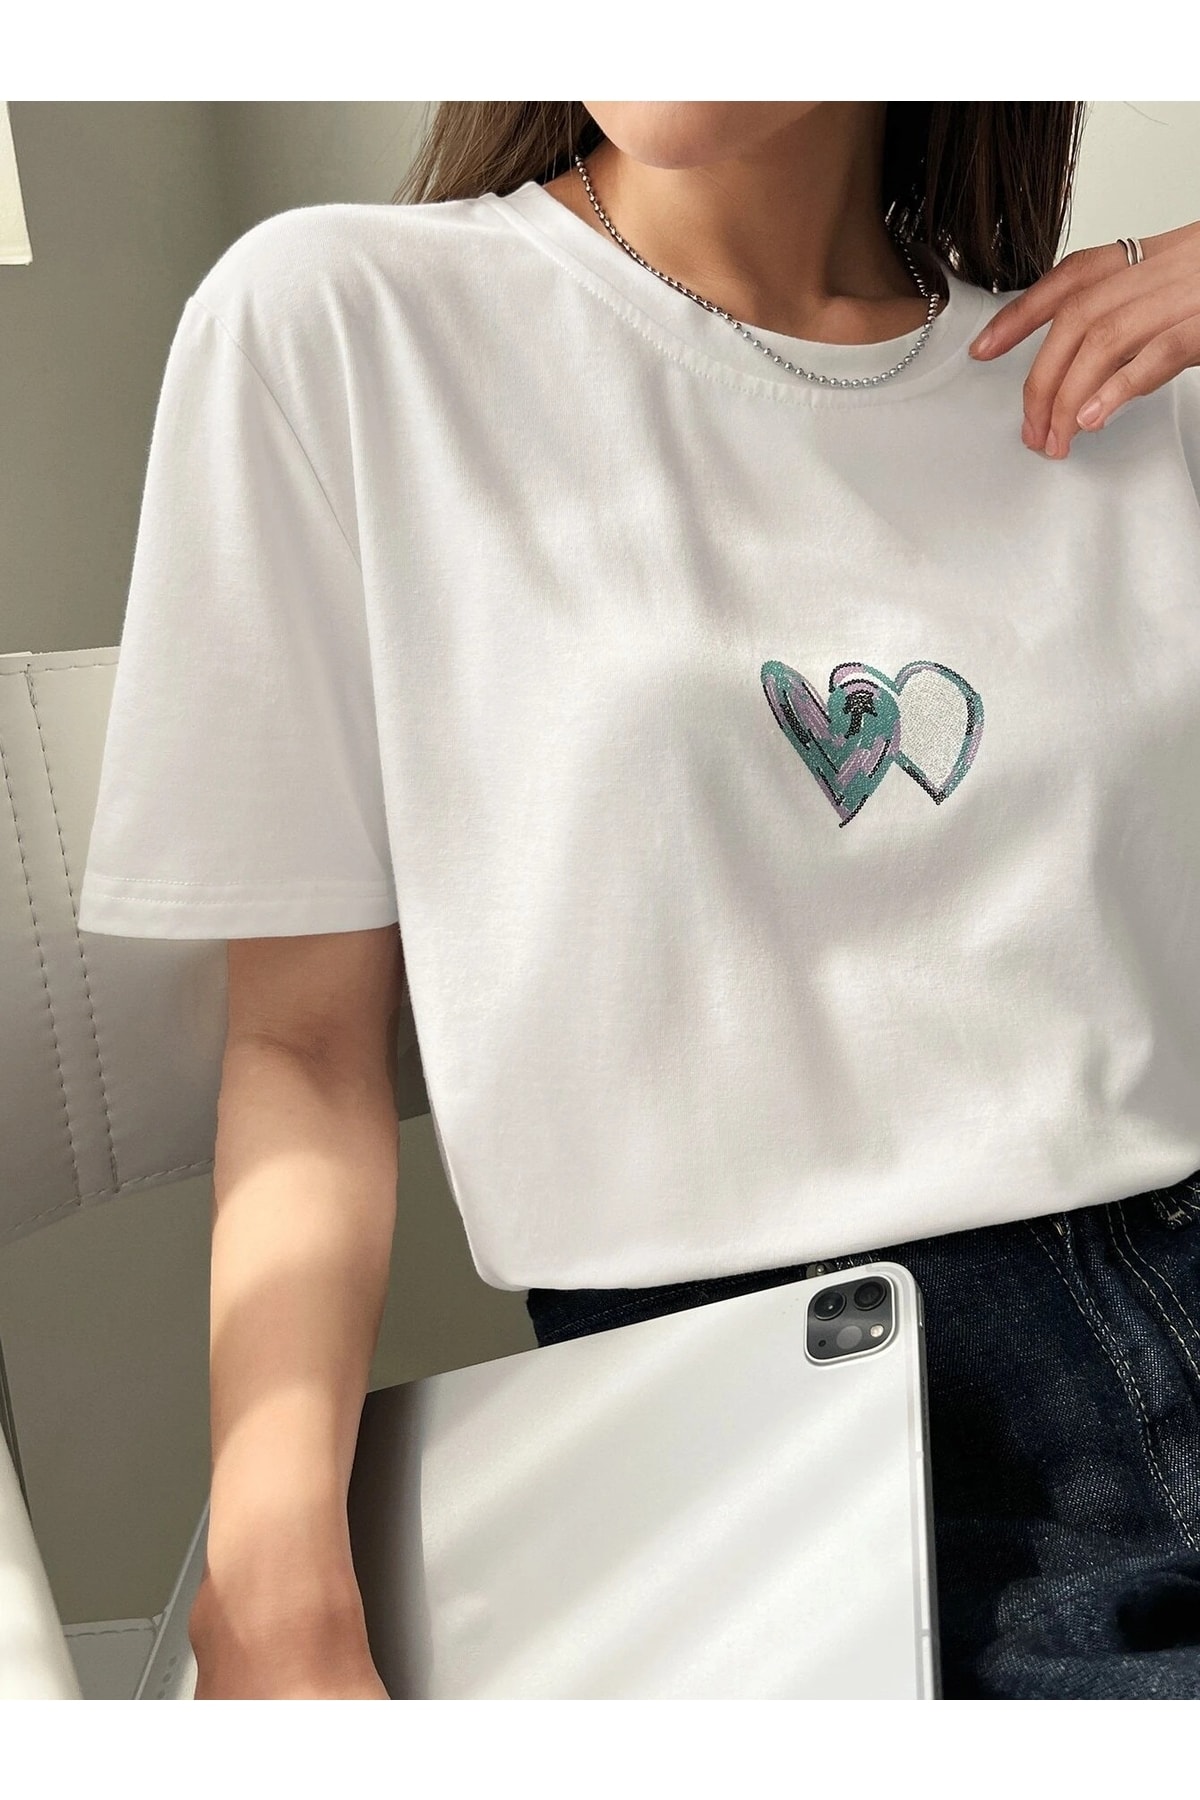 Know Women's White Double Heart Printed Oversize T-shirt